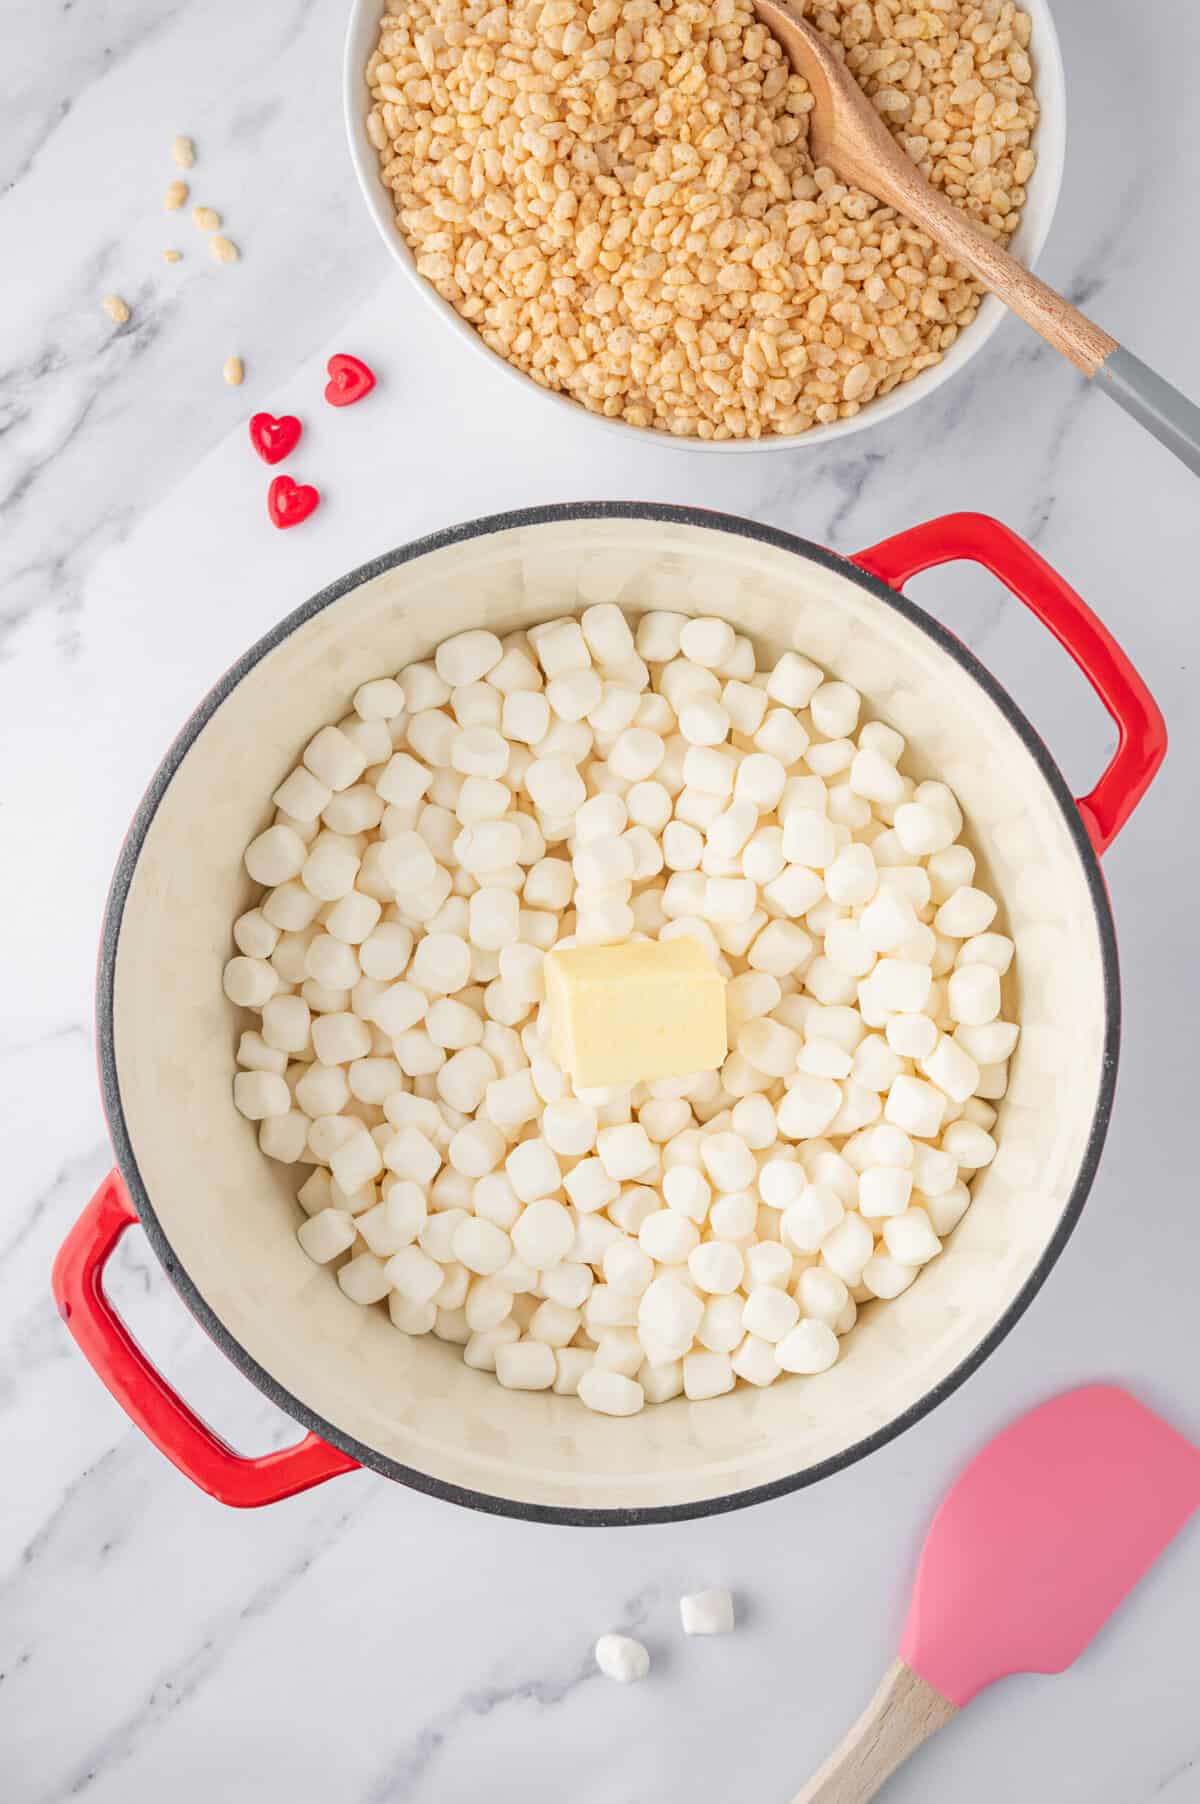 In a 5qt dutch oven, melt marshmallows and butter on low . Stir it often so it doesn't burn.